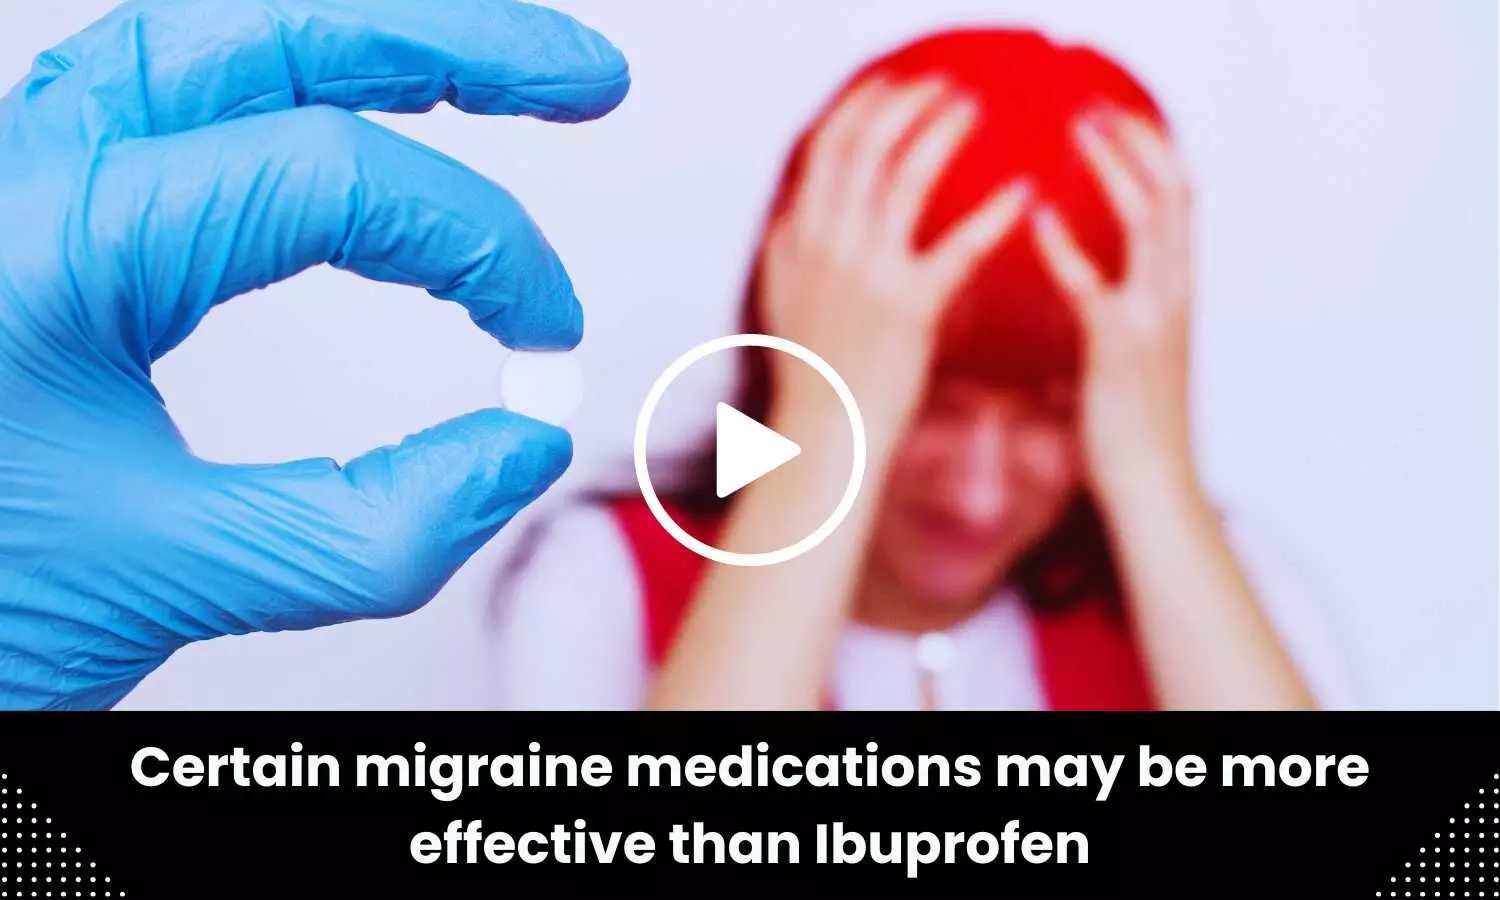 Certain migraine medications may be more effective than Ibuprofen